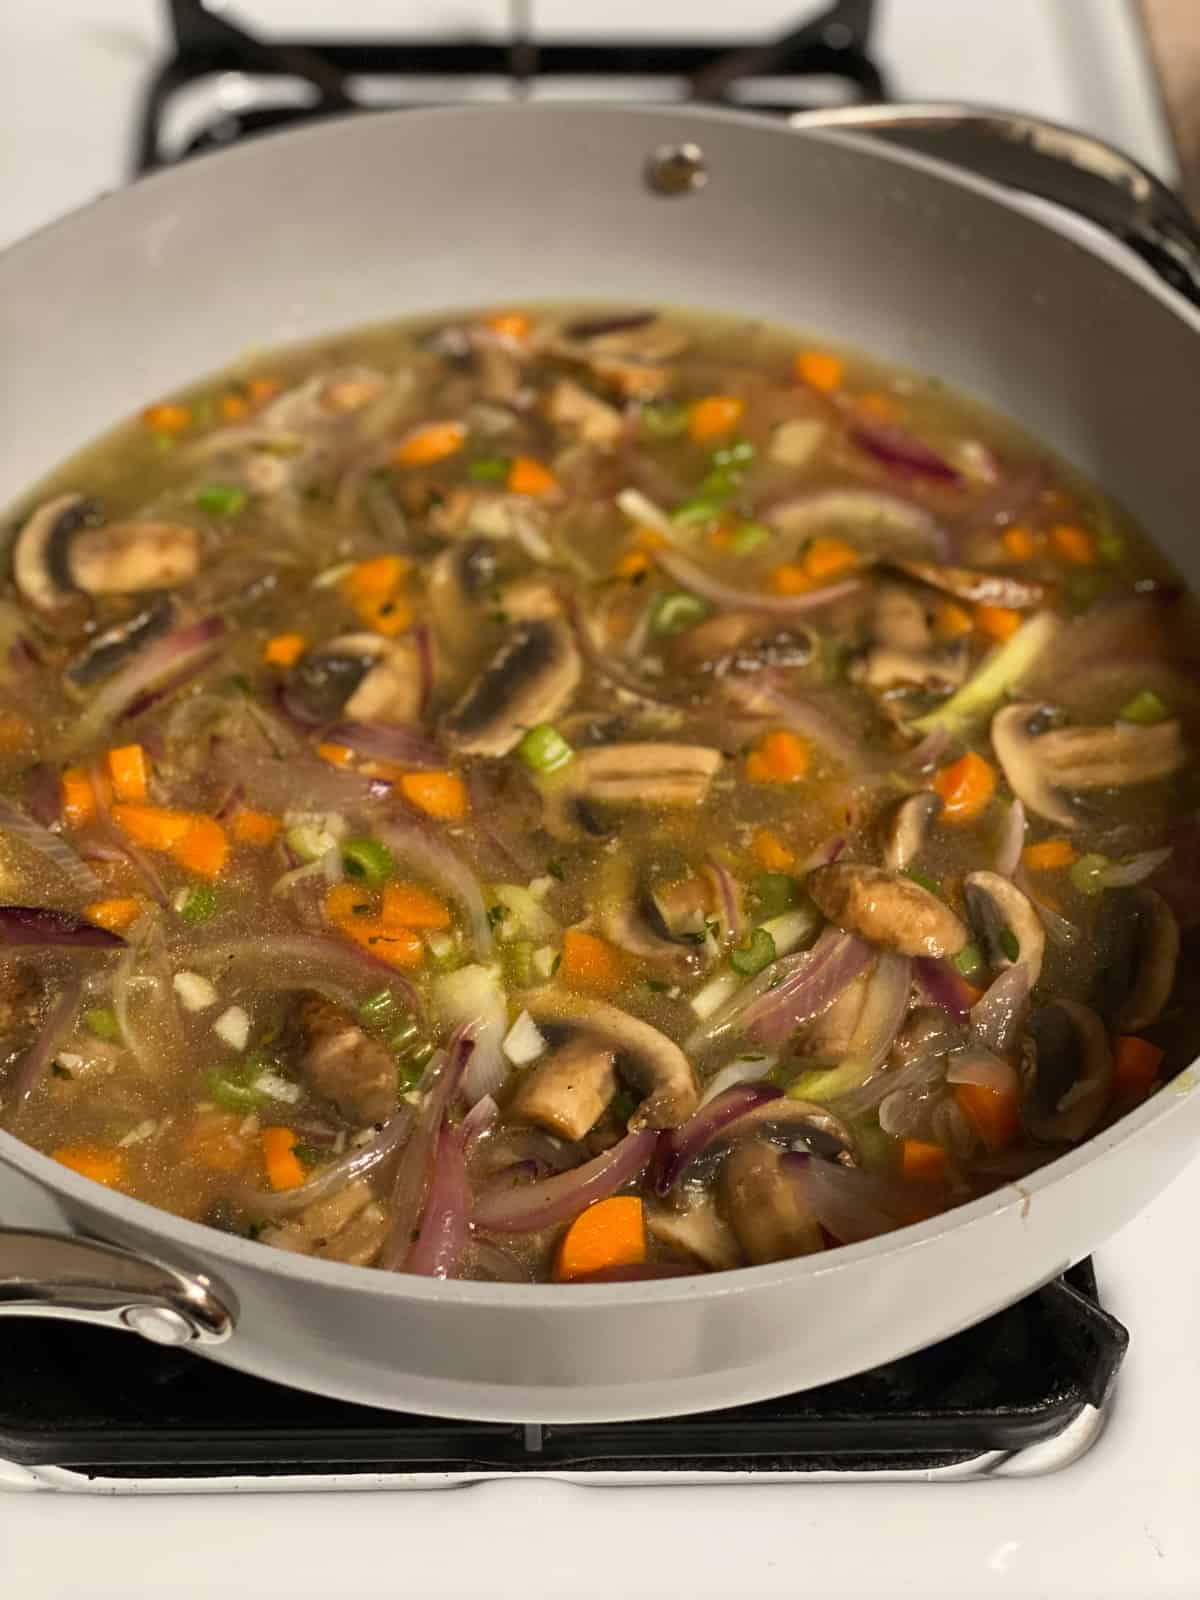 process of cooking veggies with broth in a pan